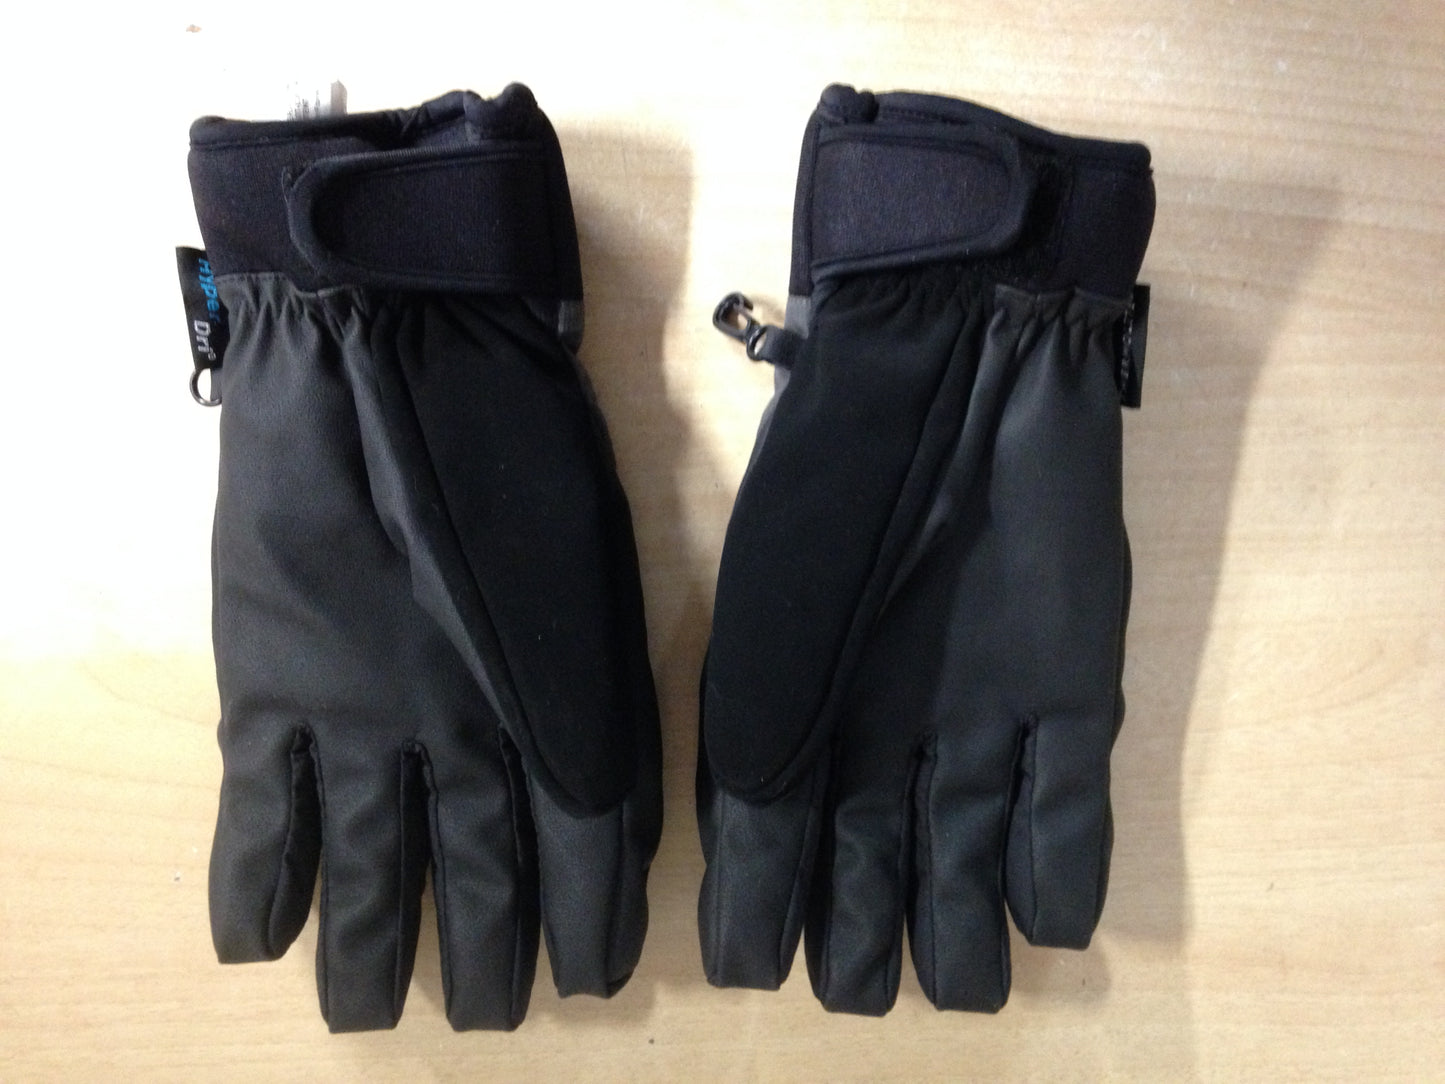 Winter Gloves and Mitts Men's Size Medium Wind River Hyper Dry Black Grey Excellent